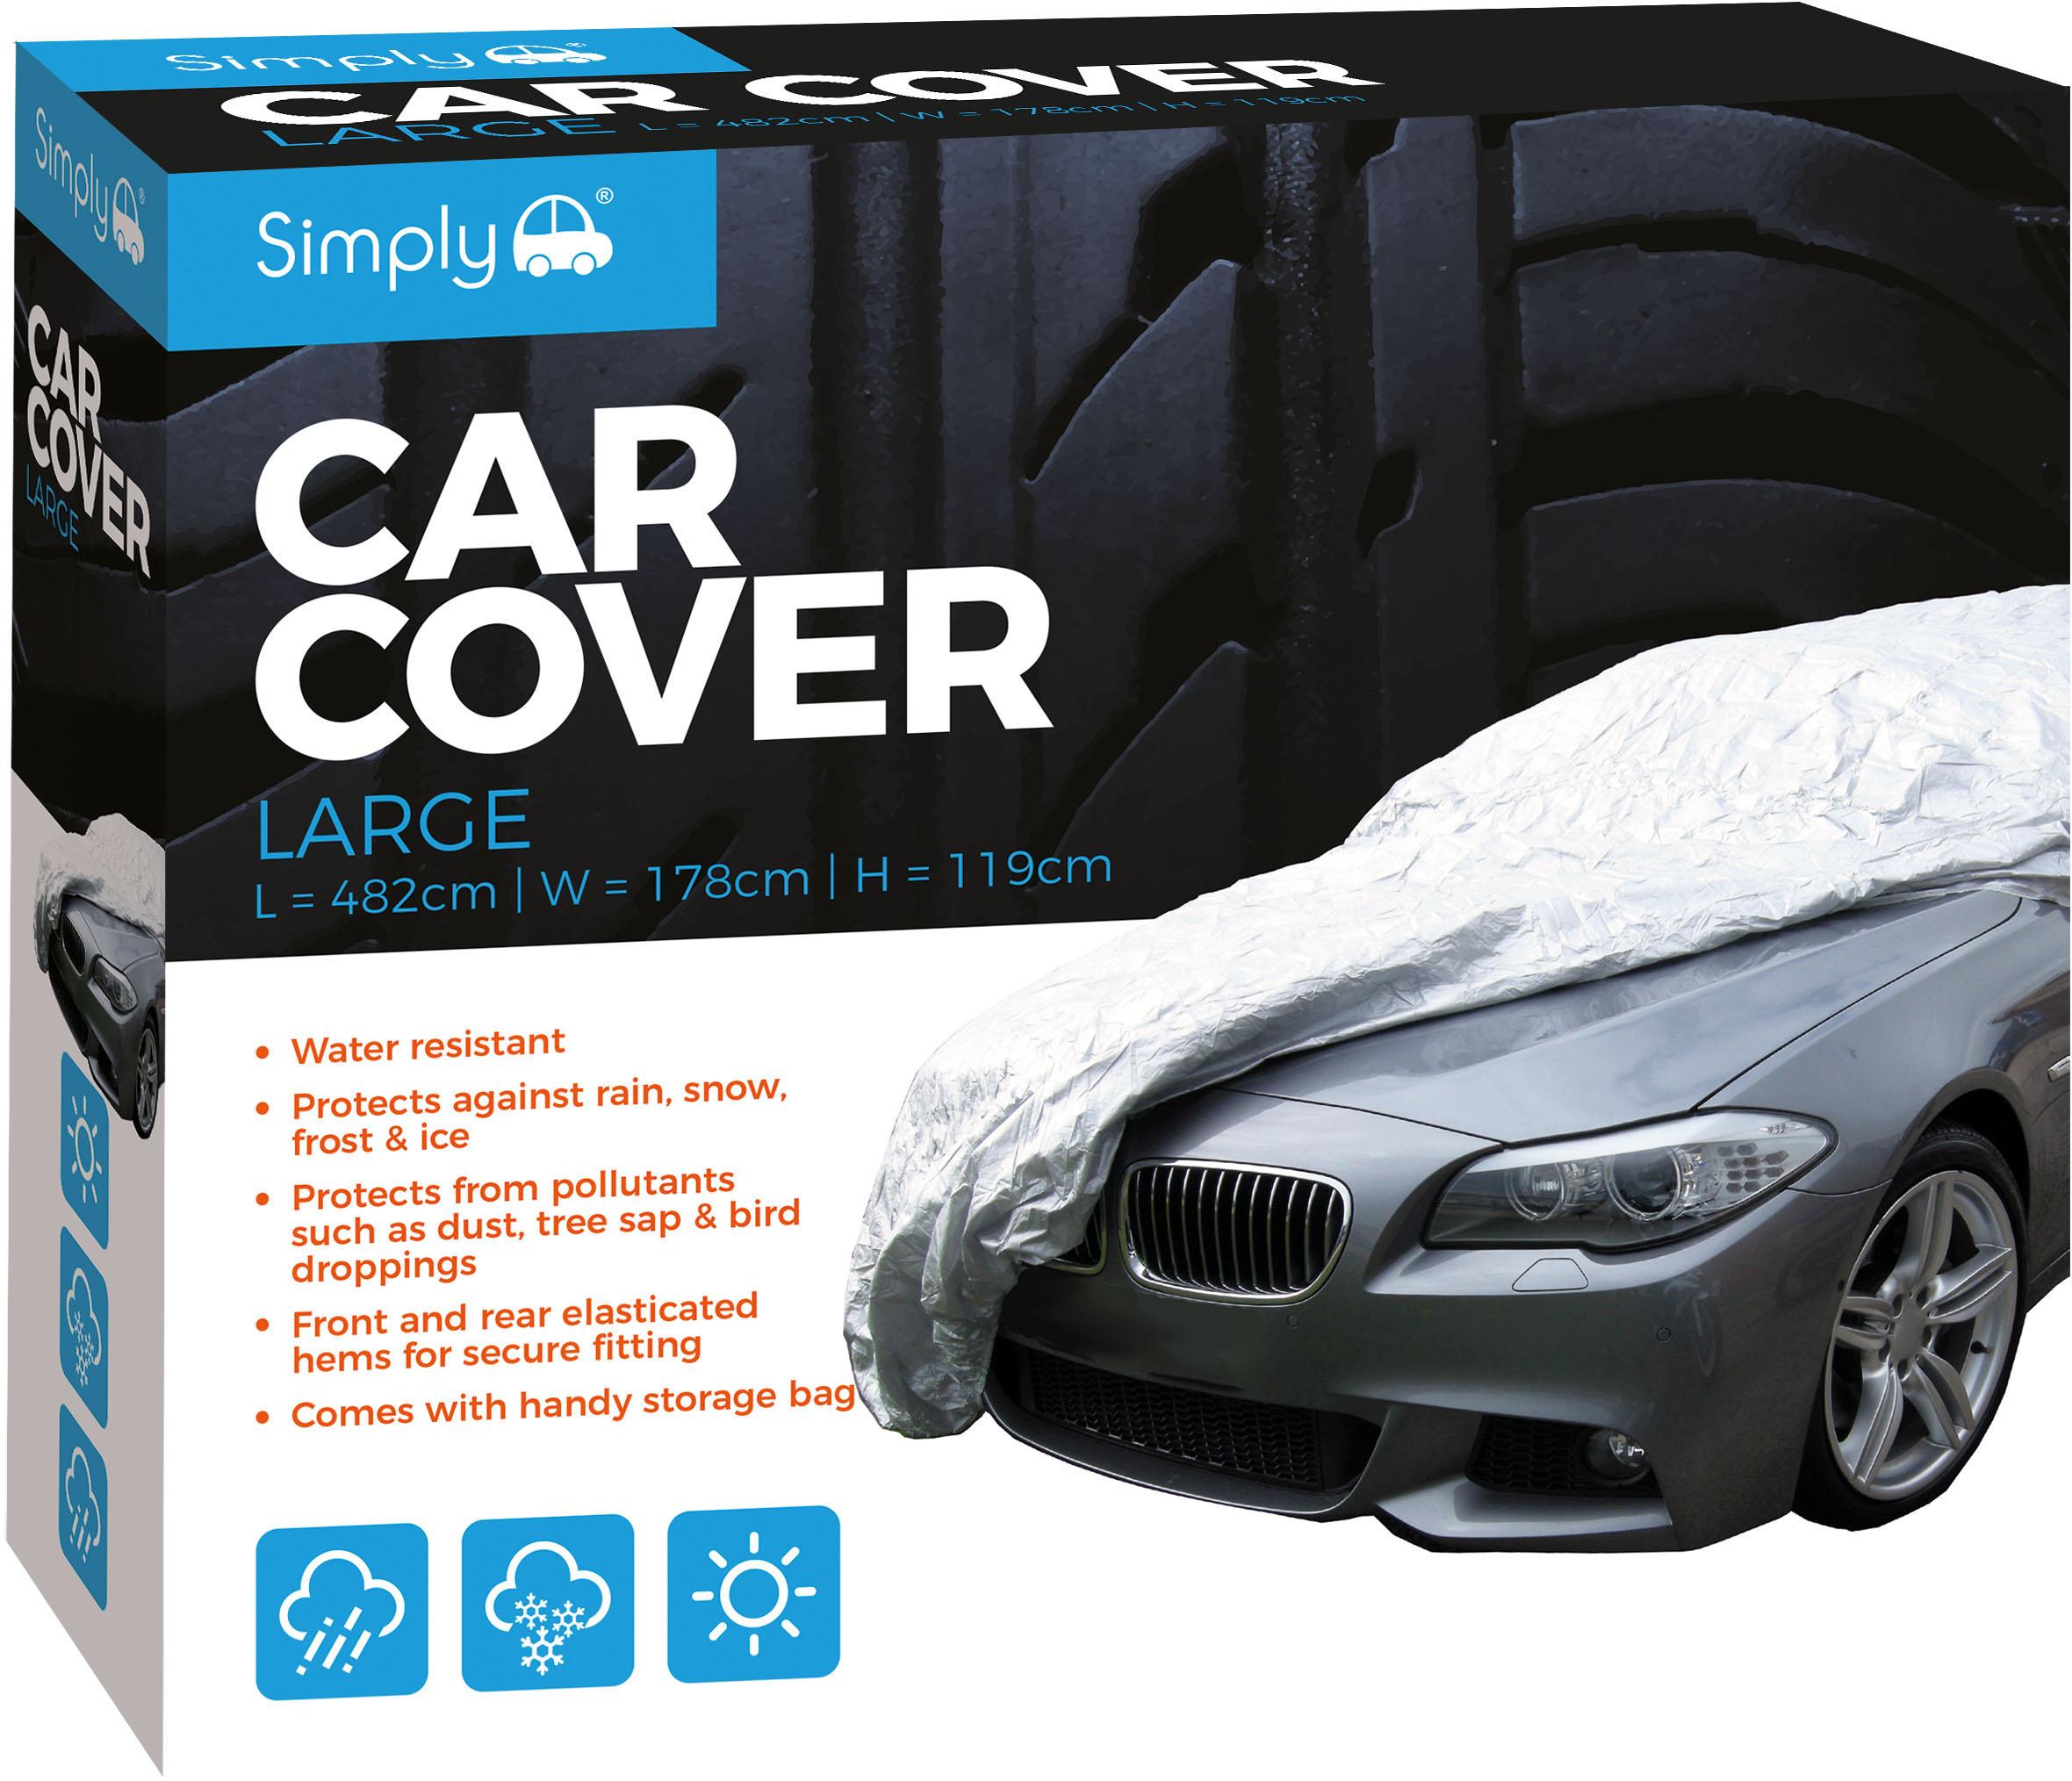 Simply Water Resistant Car Cover - Large